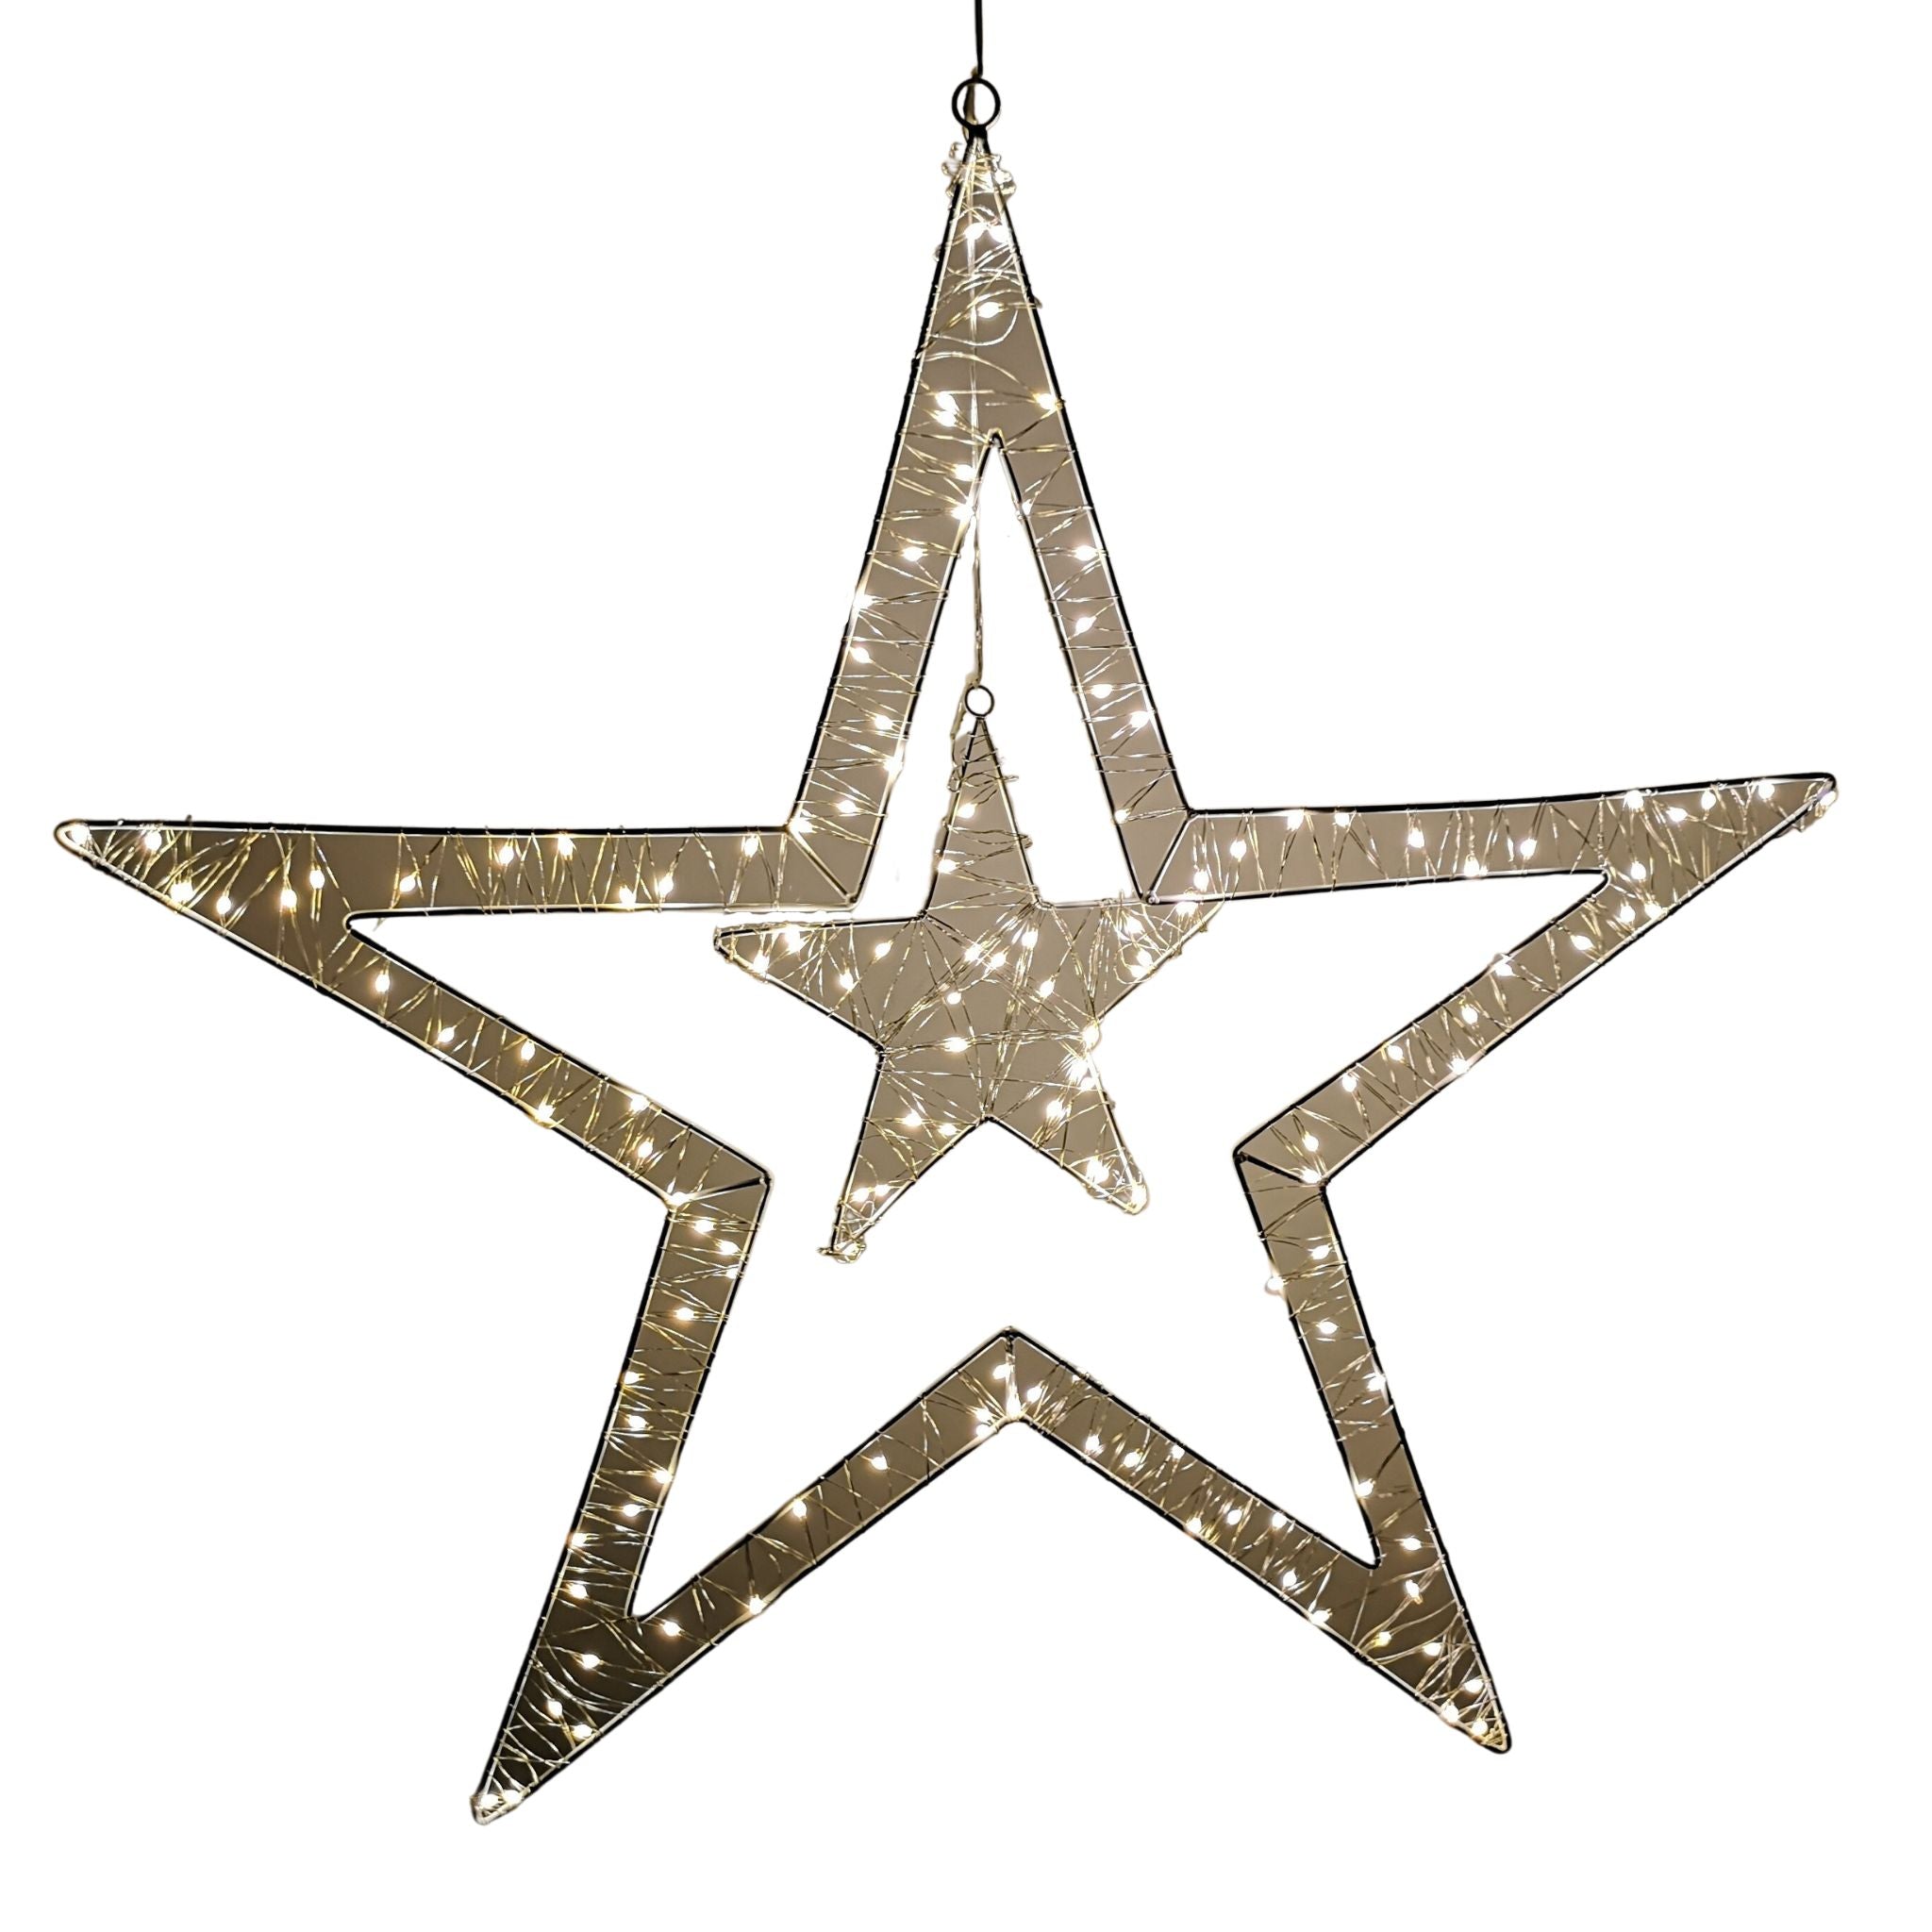 80cm Light Up Double Star Christmas Decoration with 140 LED in Warm White